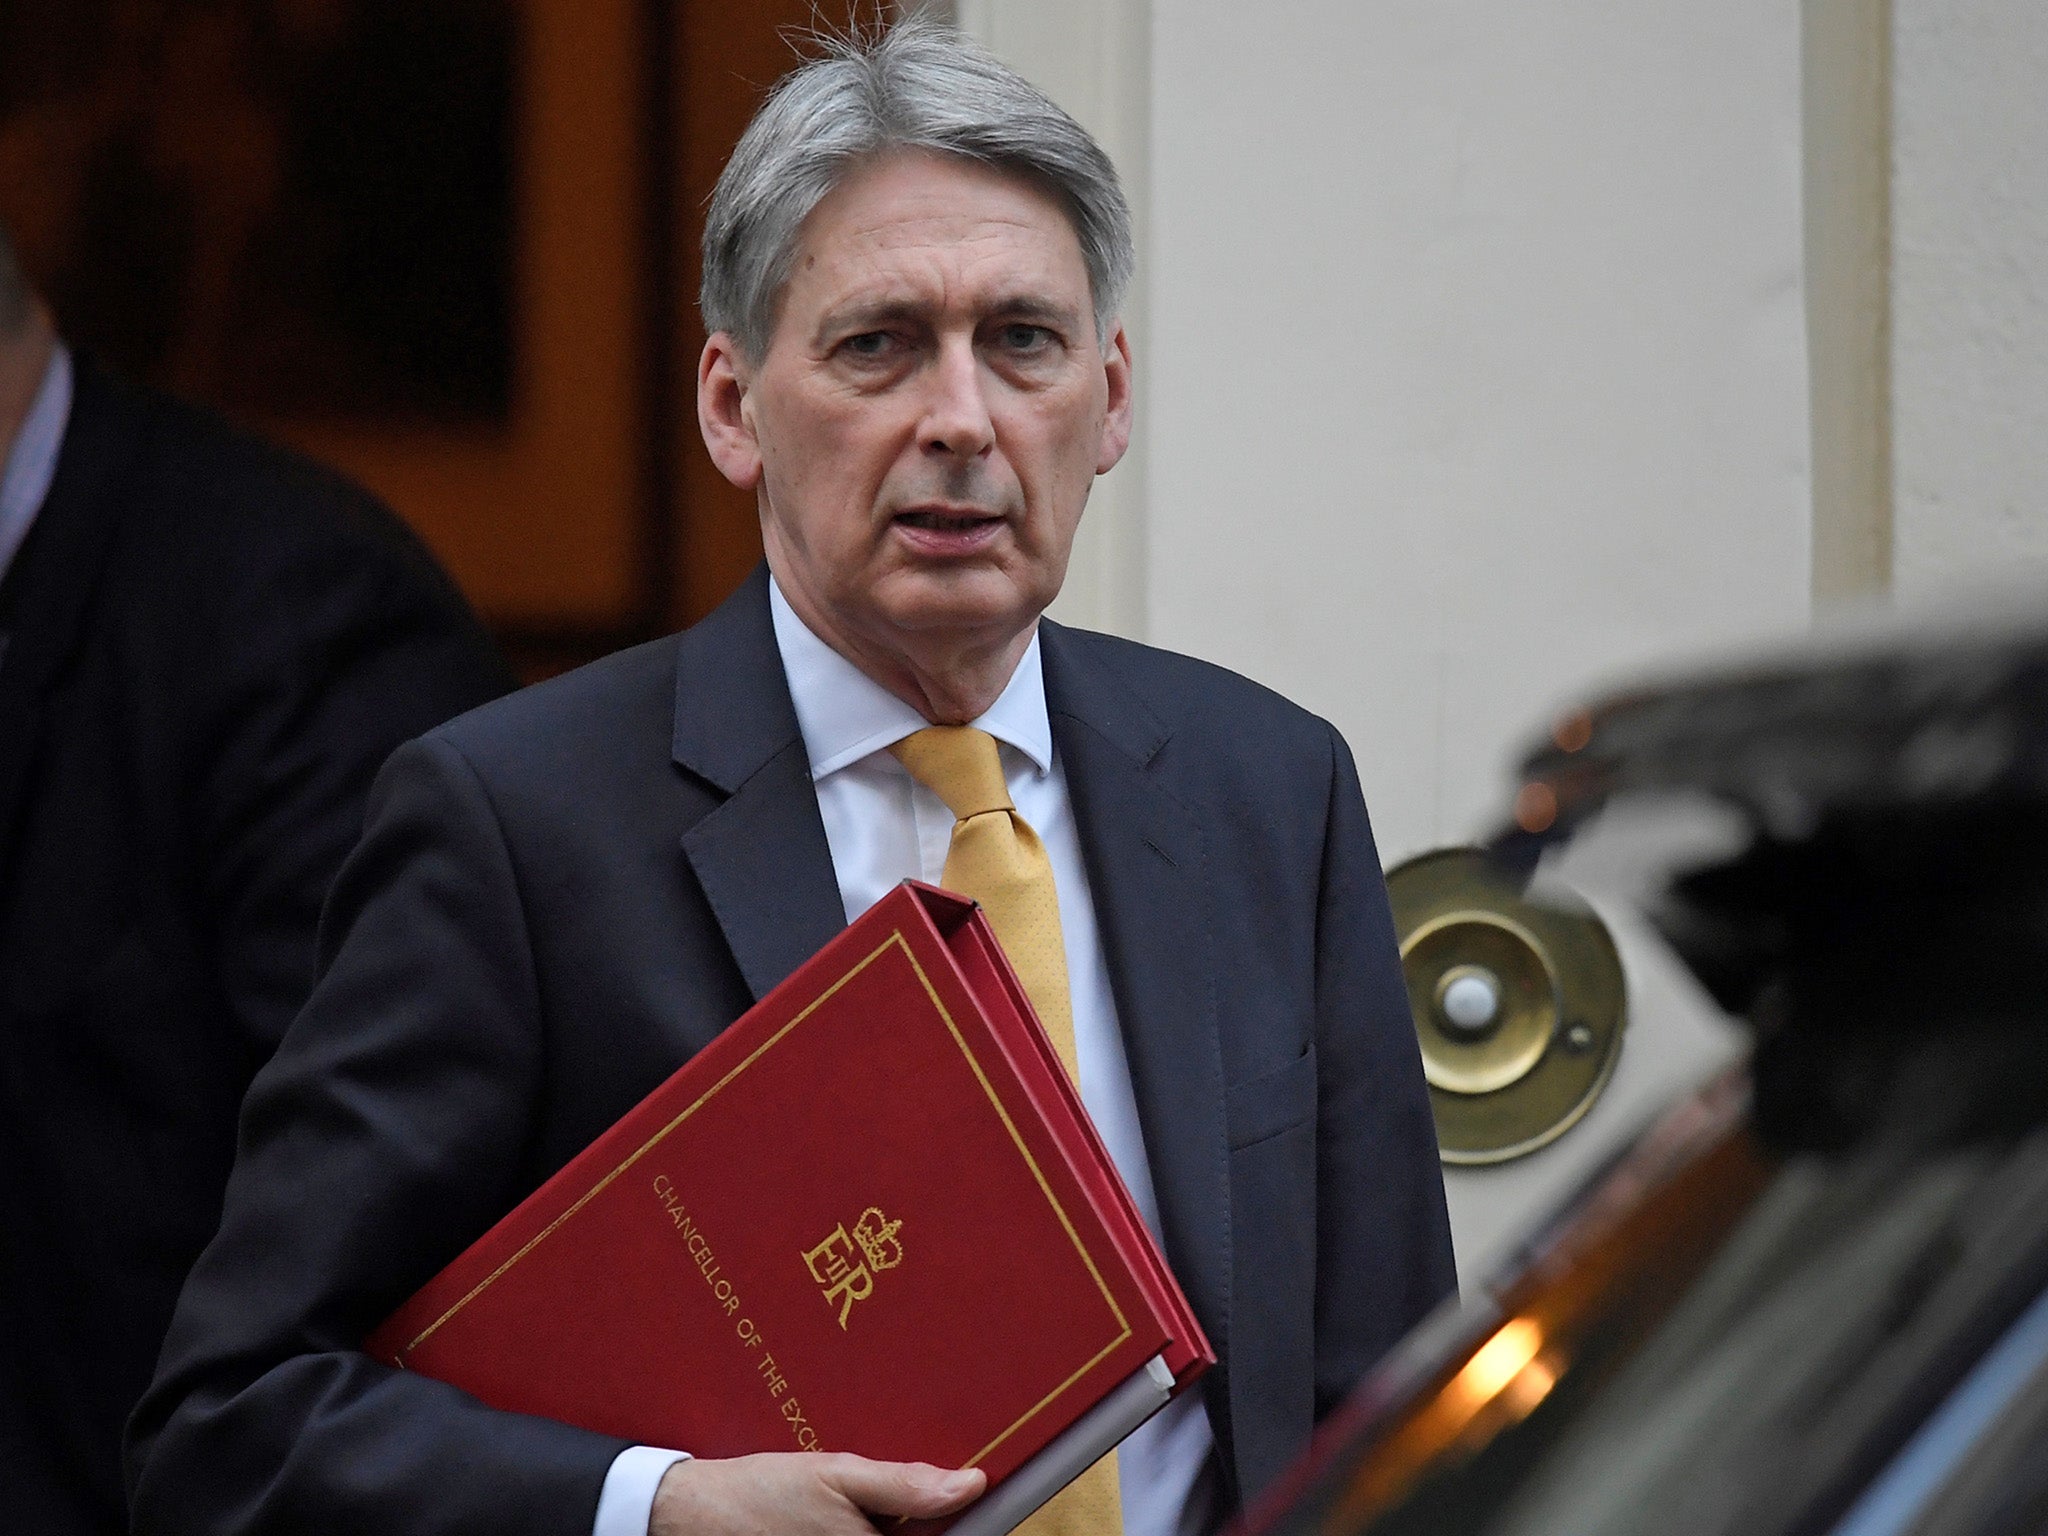 Philip Hammond will be unveiling his budget on 29 October